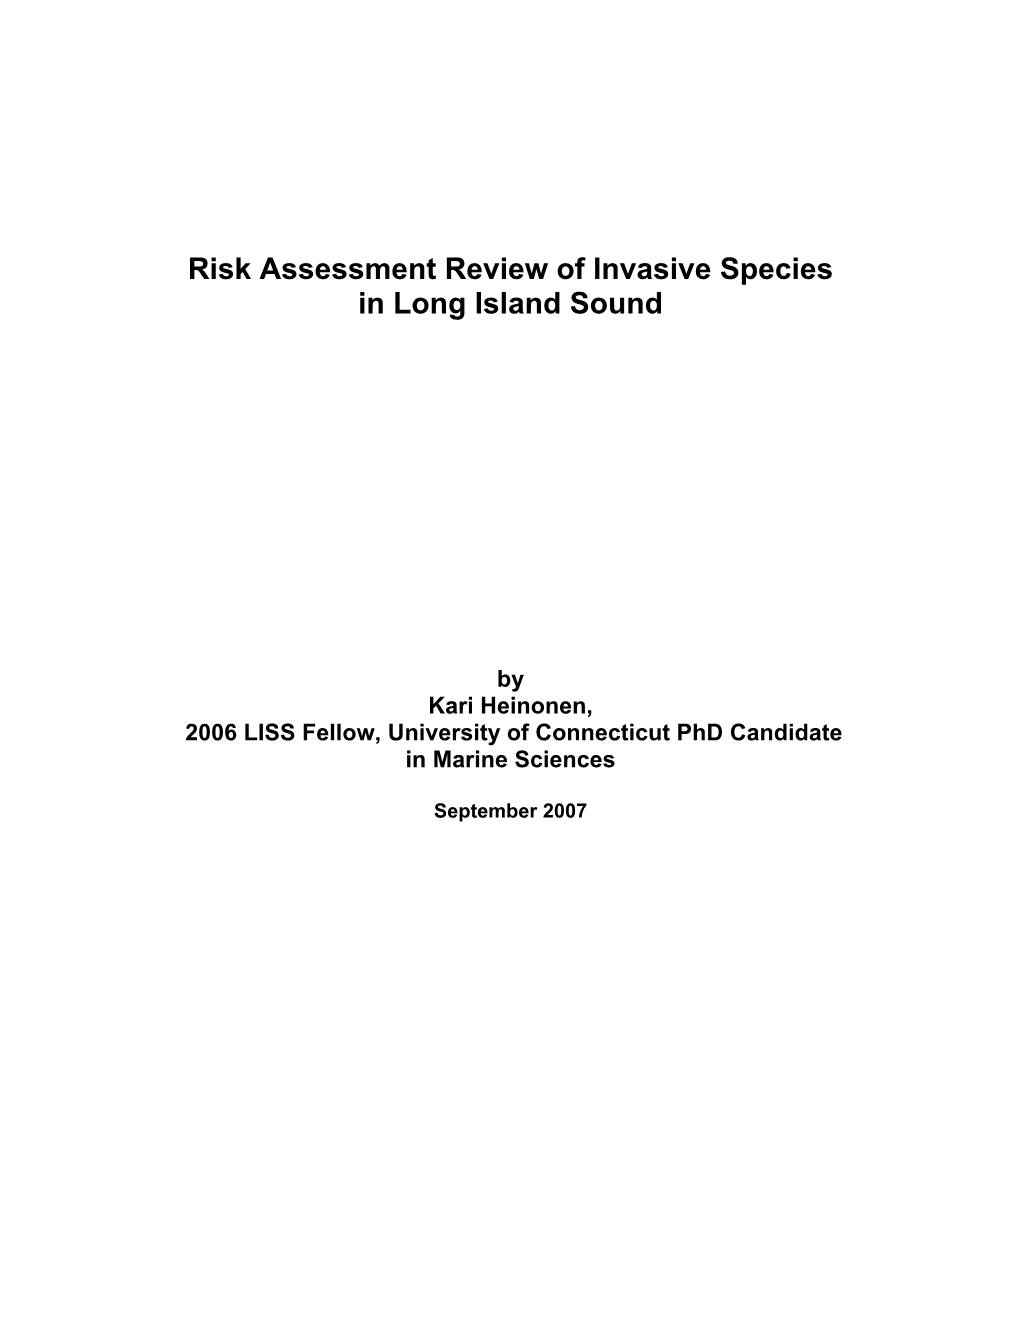 Risk Assessment Review of Invasive Species in Long Island Sound